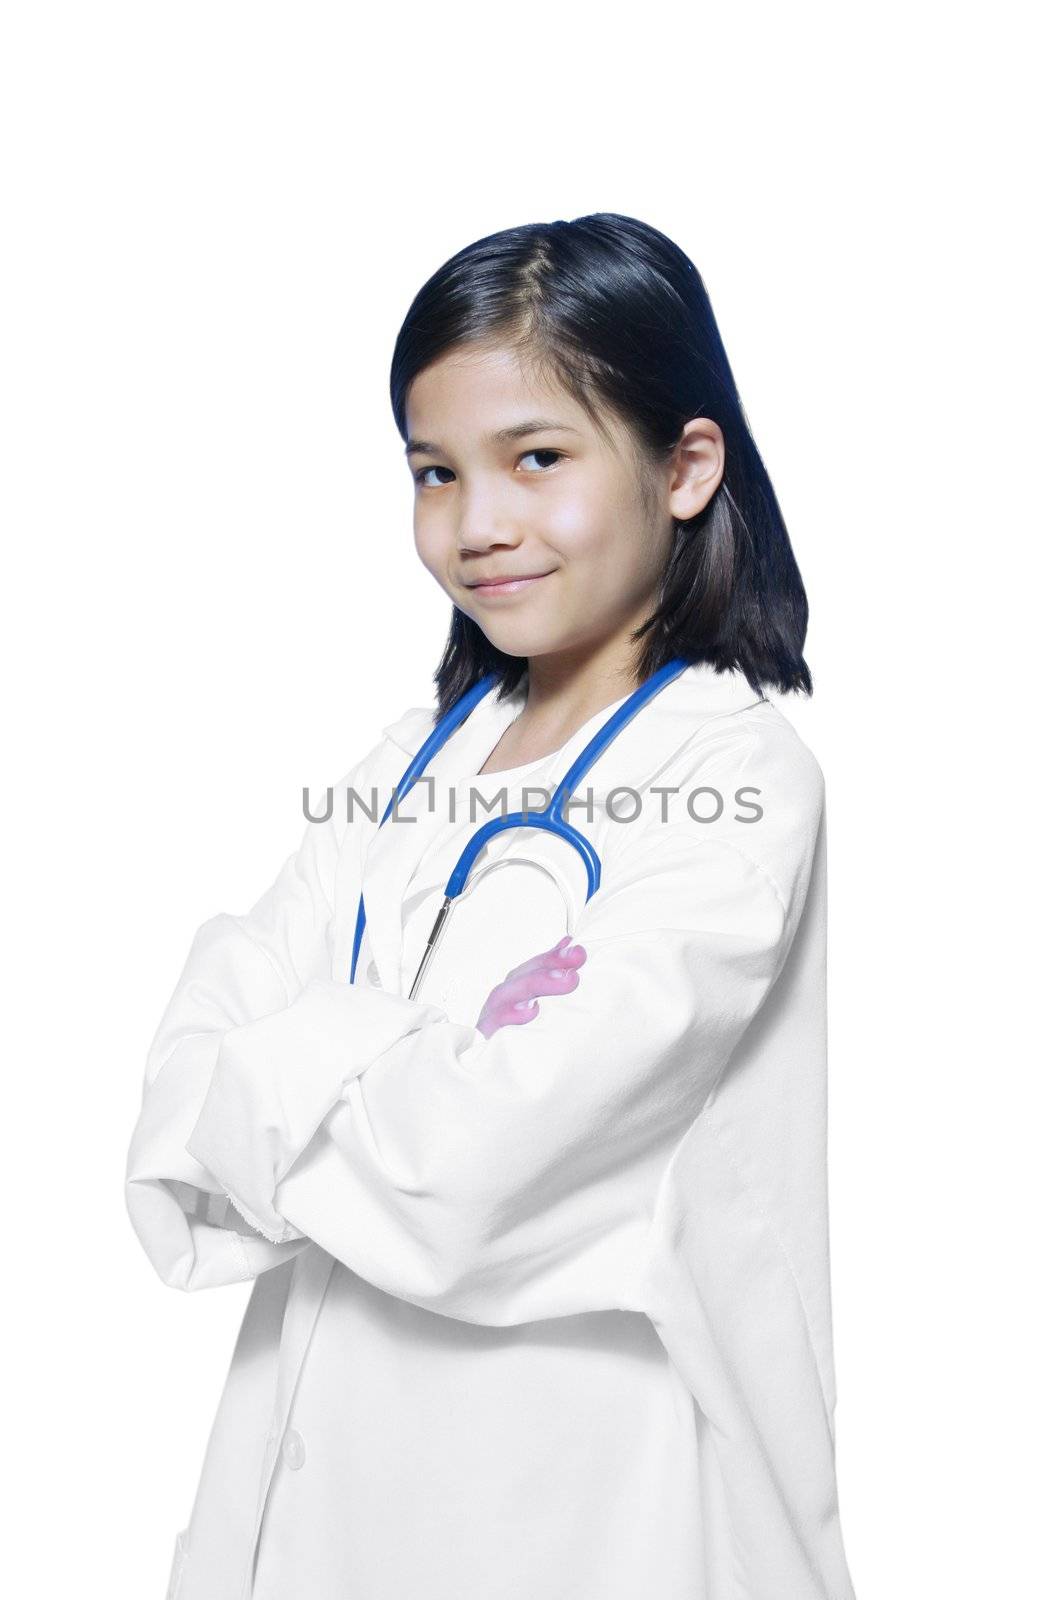 Nine year old girl playing doctor with white lab coat and stethoscope